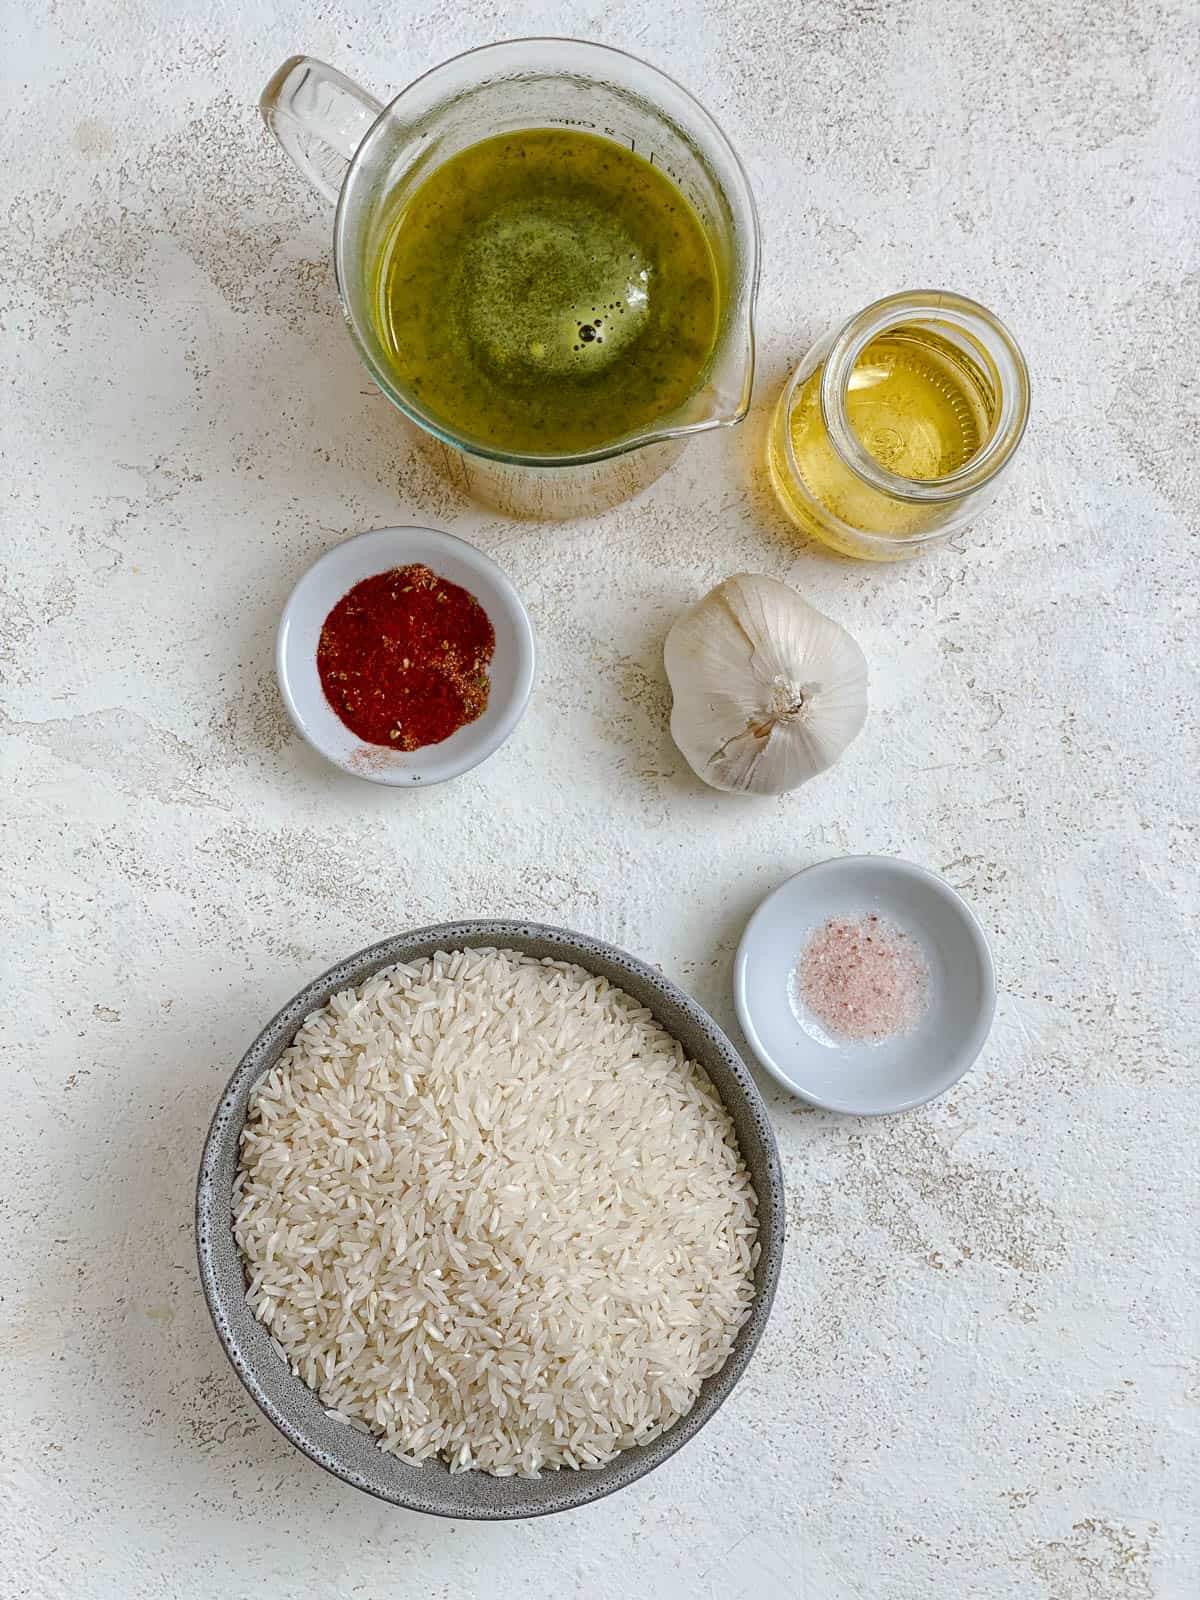 ingredients for Garlic Rice [Spanish Yellow Rice] measured out against a white surface